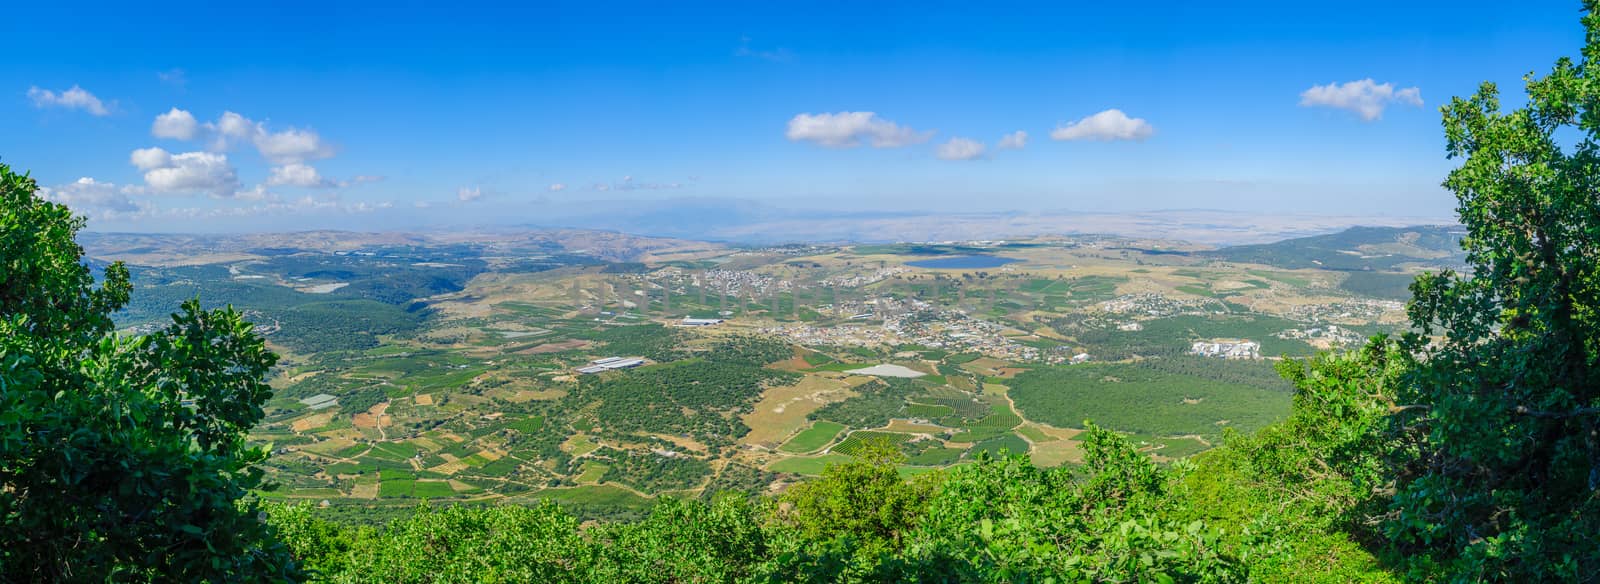 Panoramic landscape from Mount Meron in the upper Galilee. Northern Israel